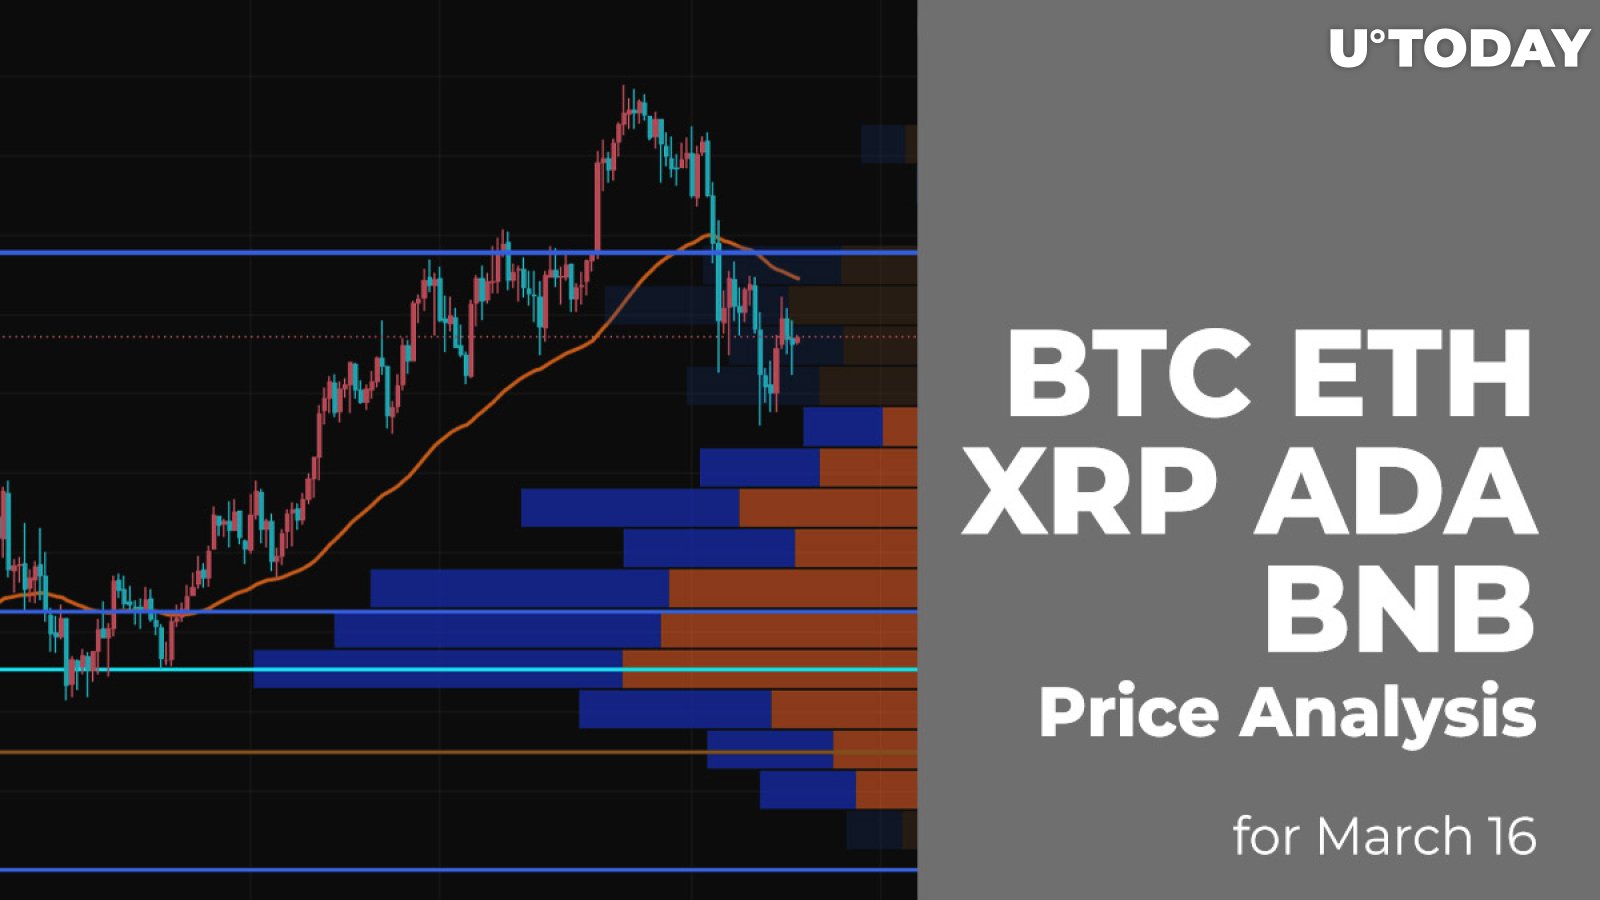 BTC, ETH, XRP, ADA and BNB Price Analysis for March 16